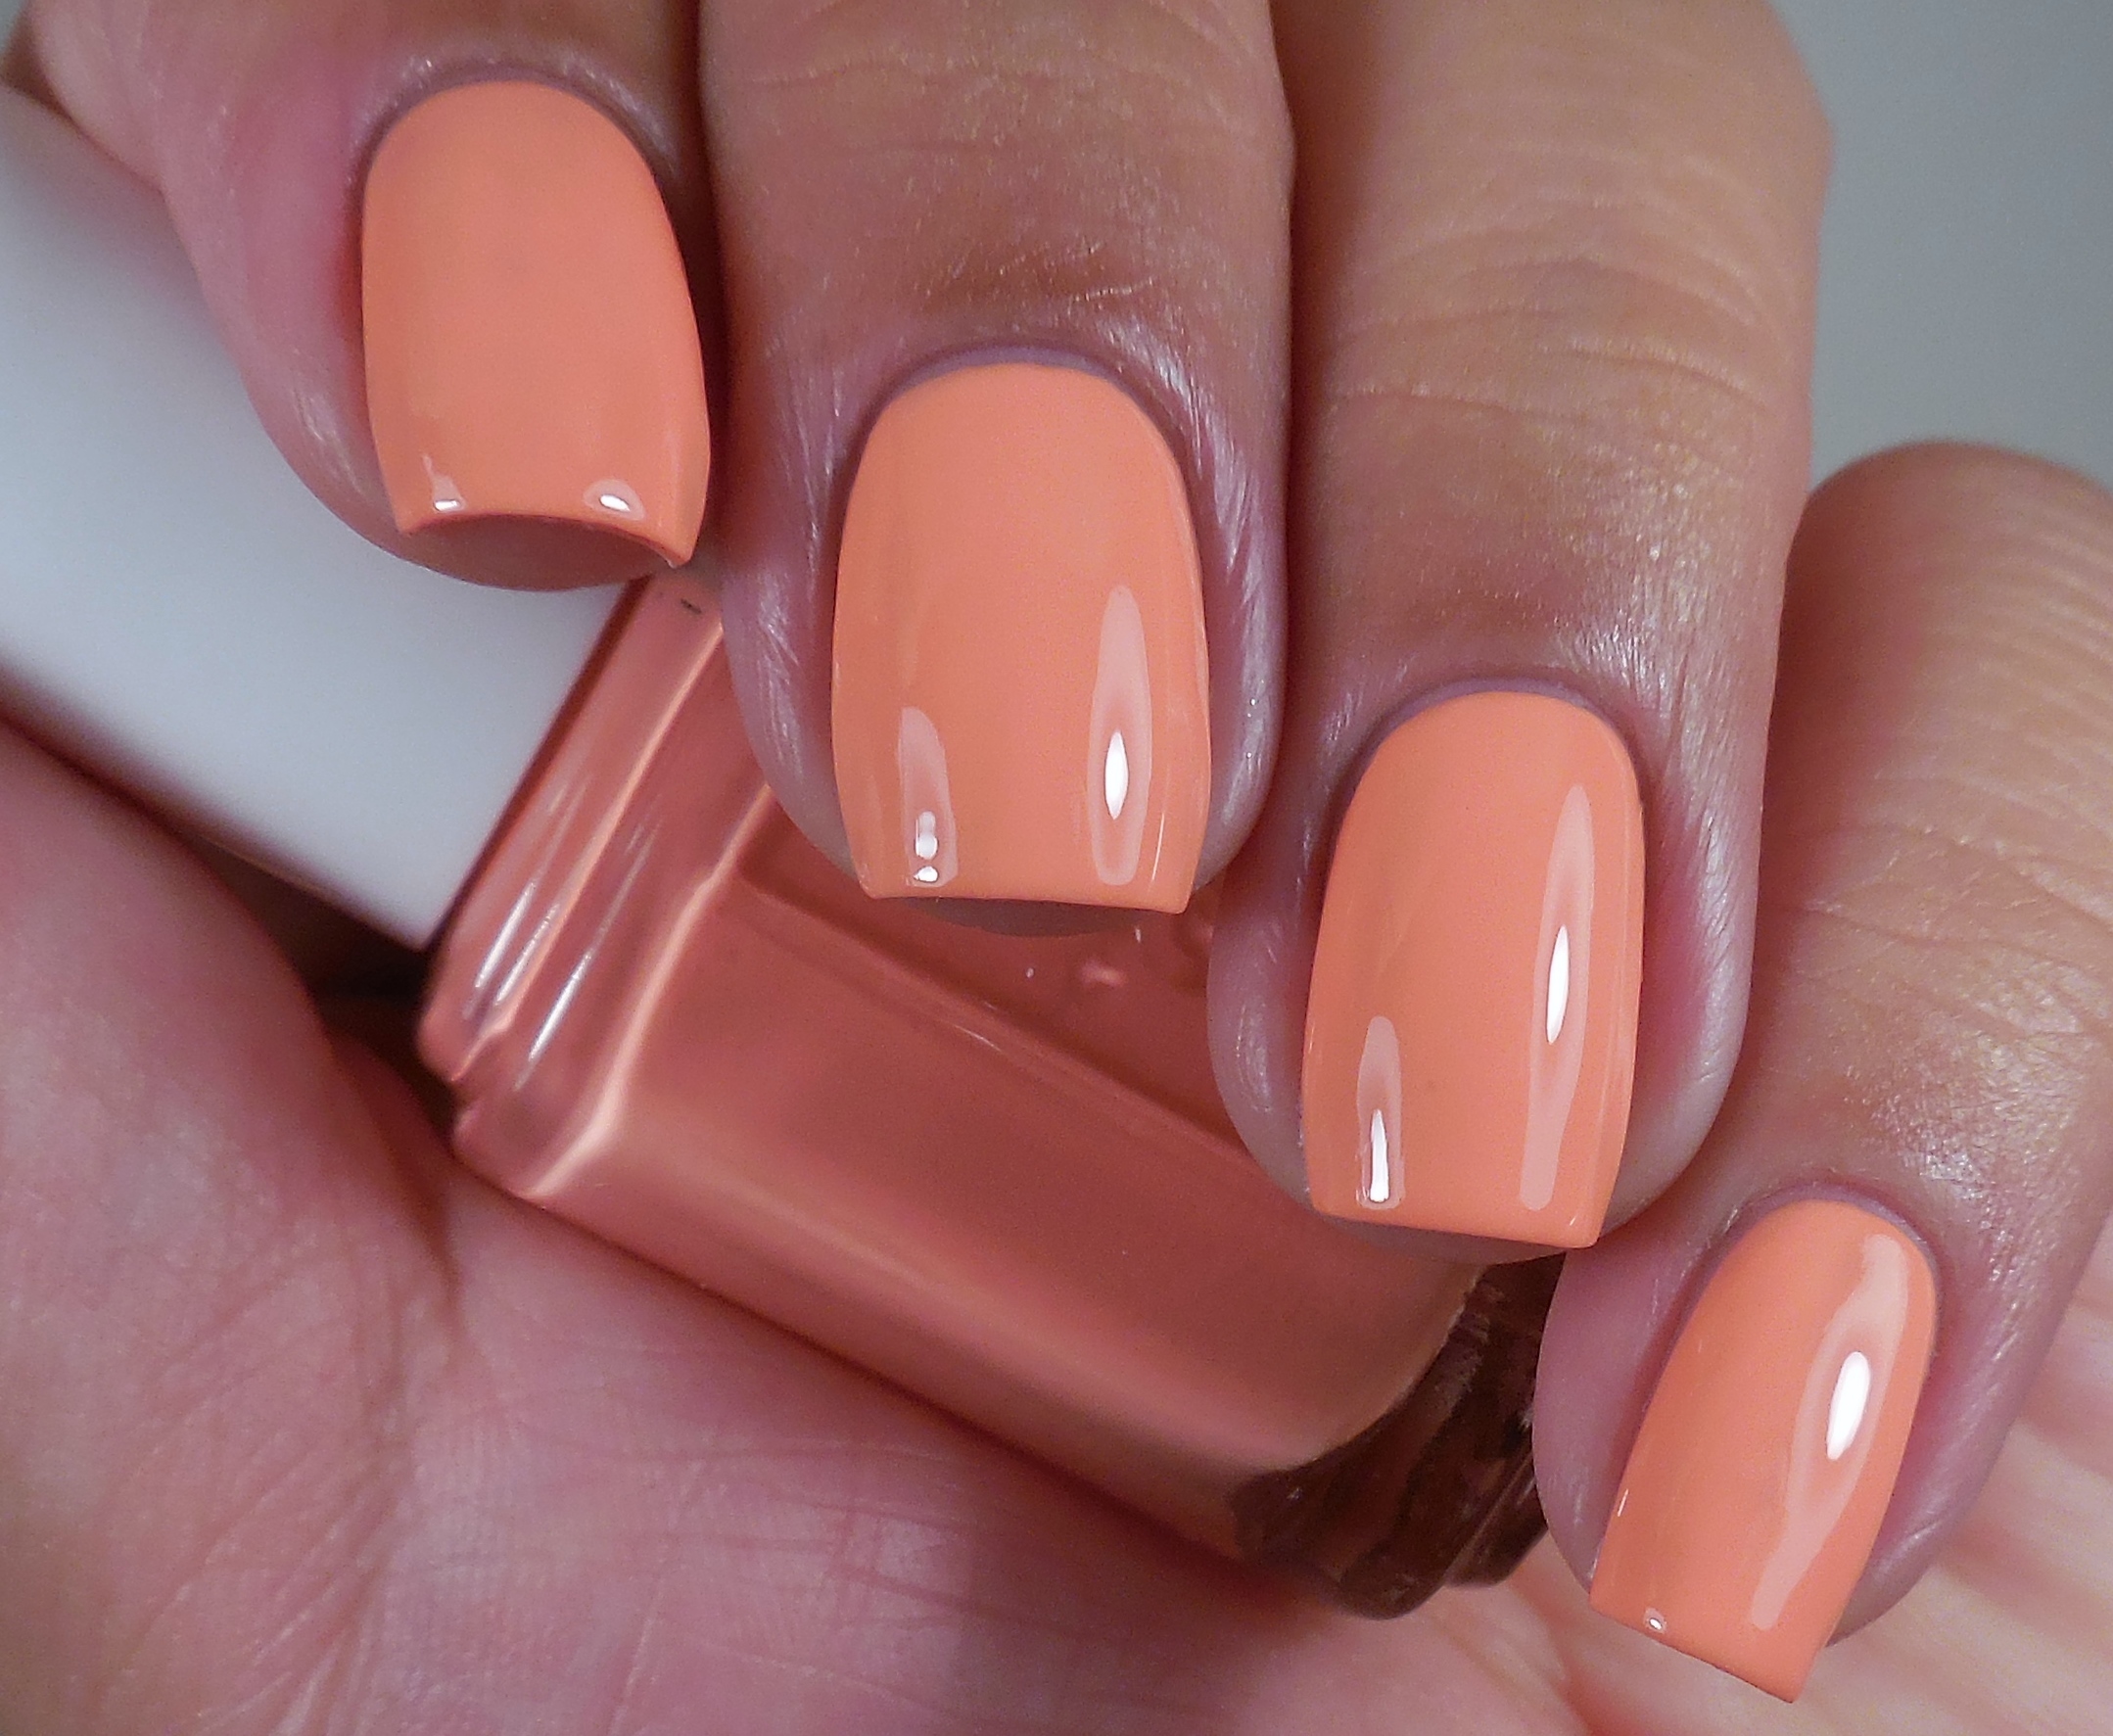 3. OPI Nail Lacquer in Peach Side Babe - wide 6